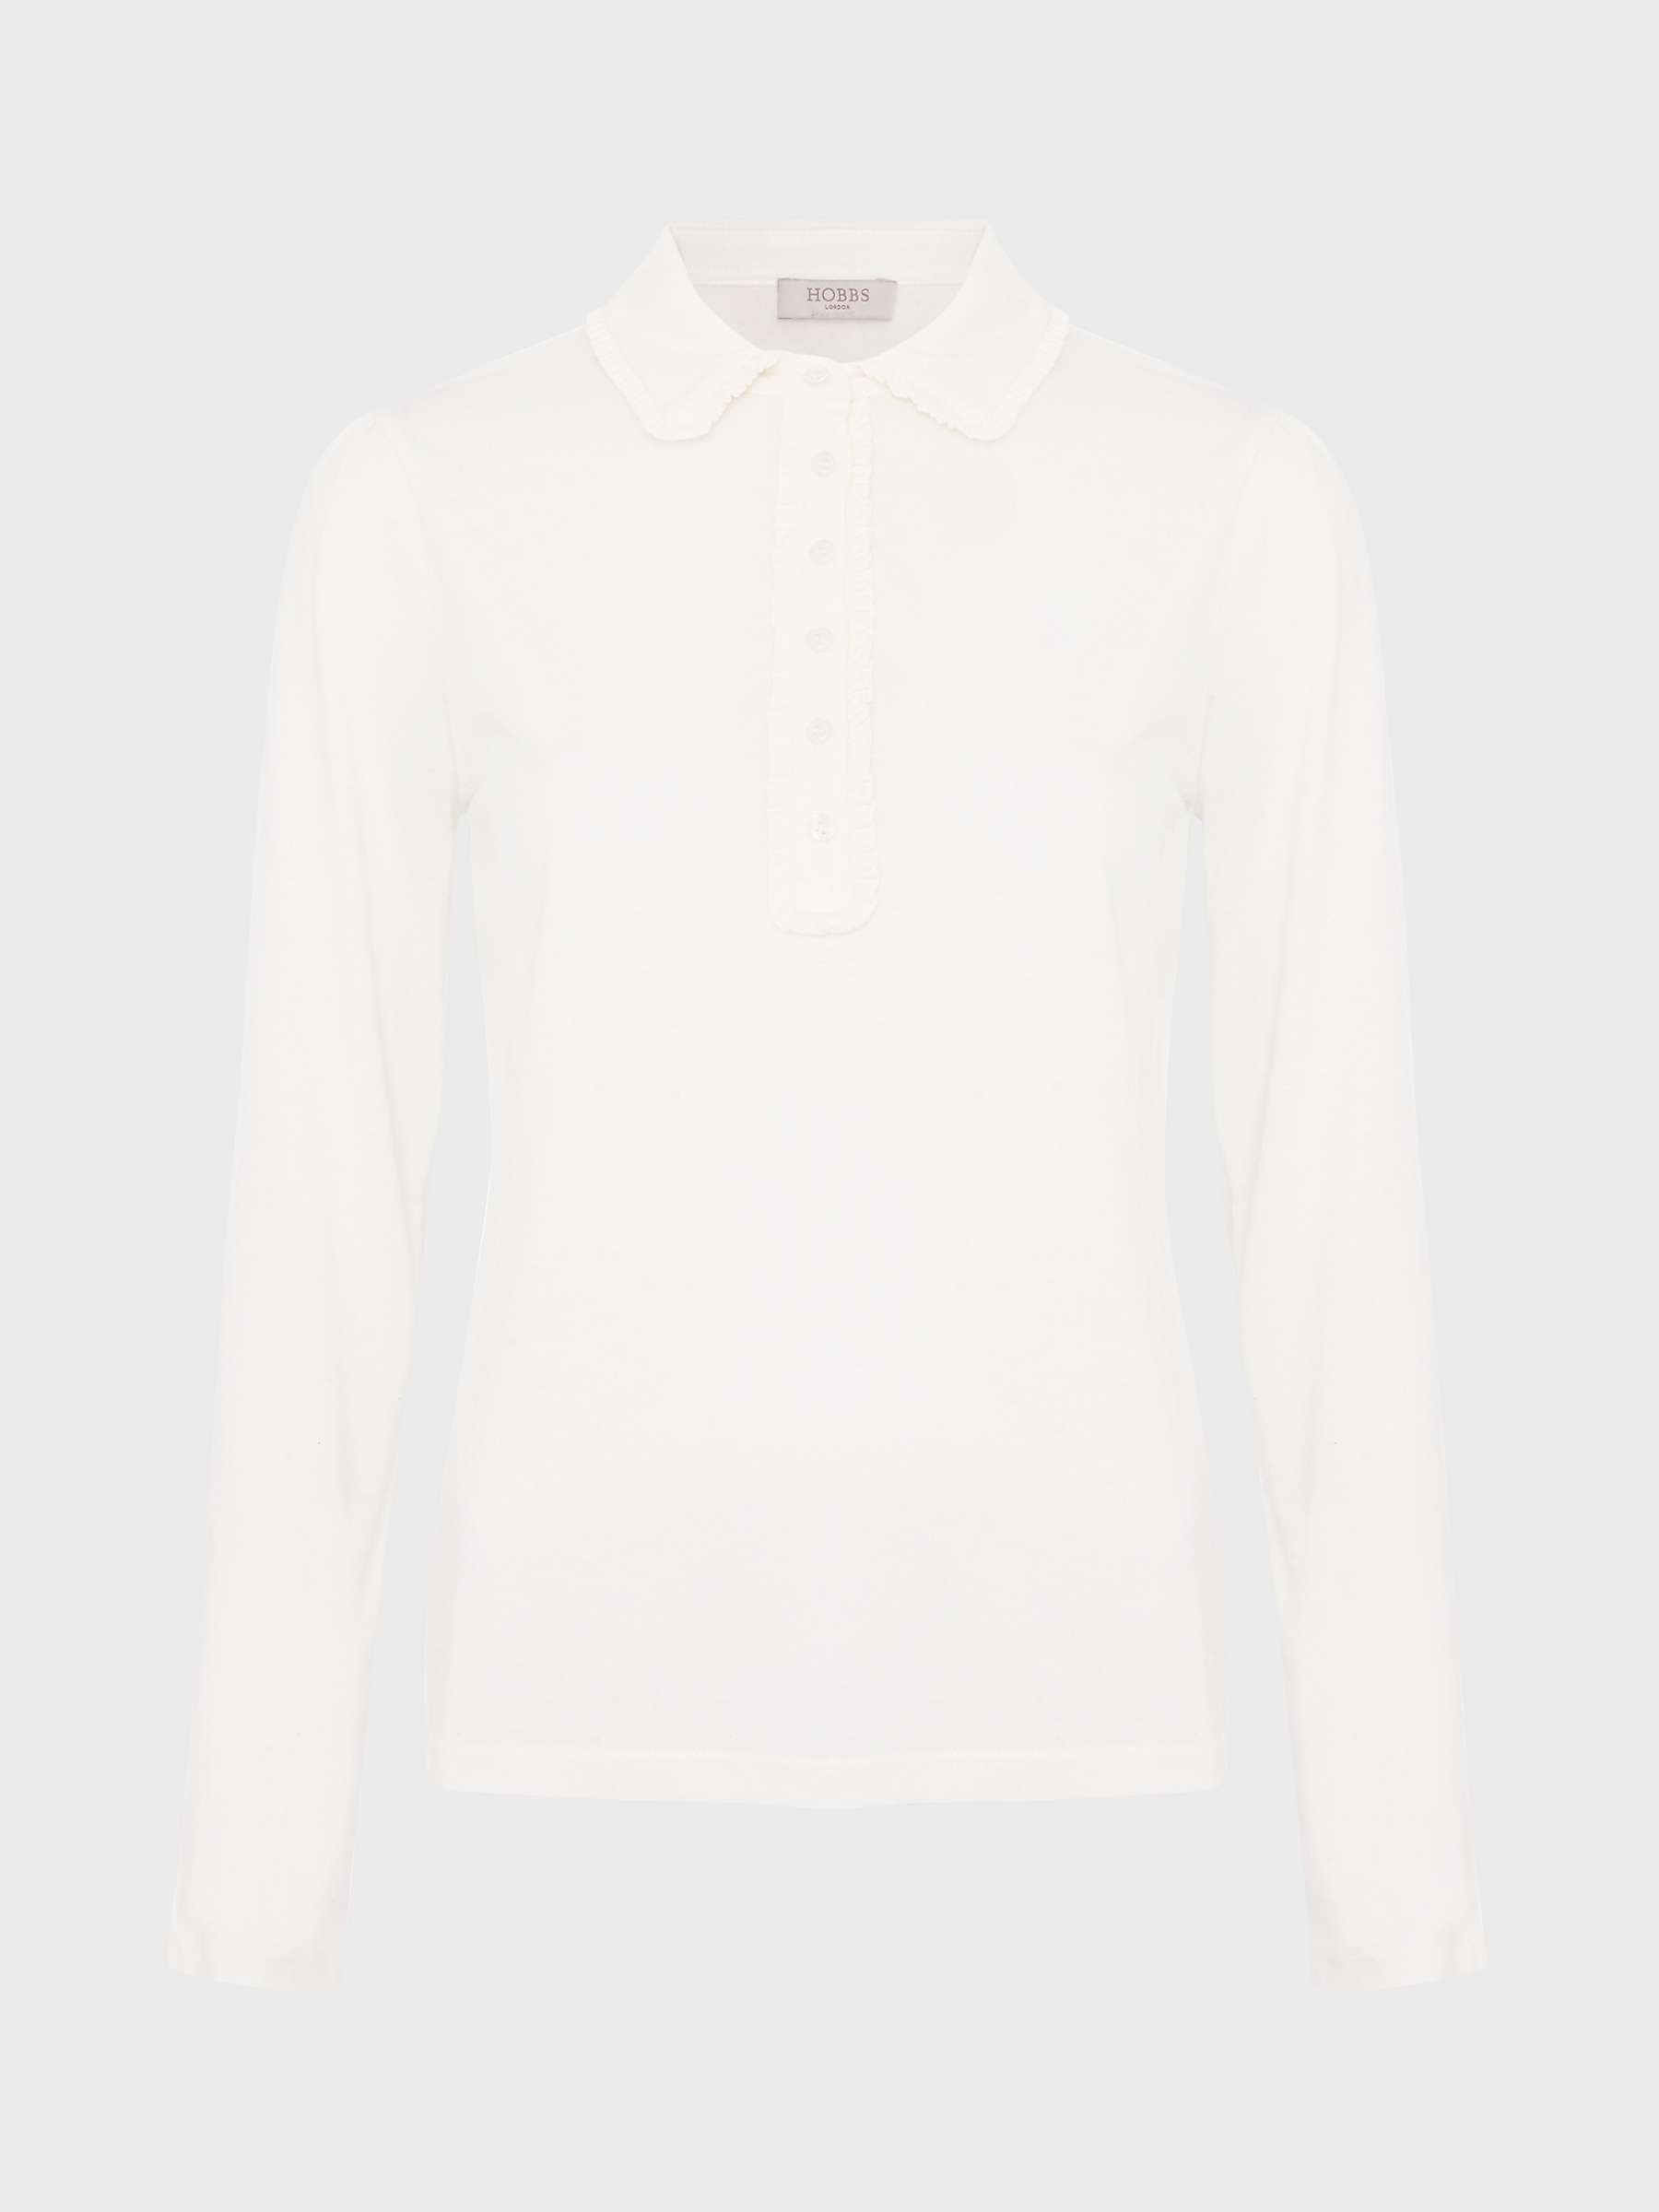 Buy Hobbs Philippa Collared Blouse, Ivory Online at johnlewis.com